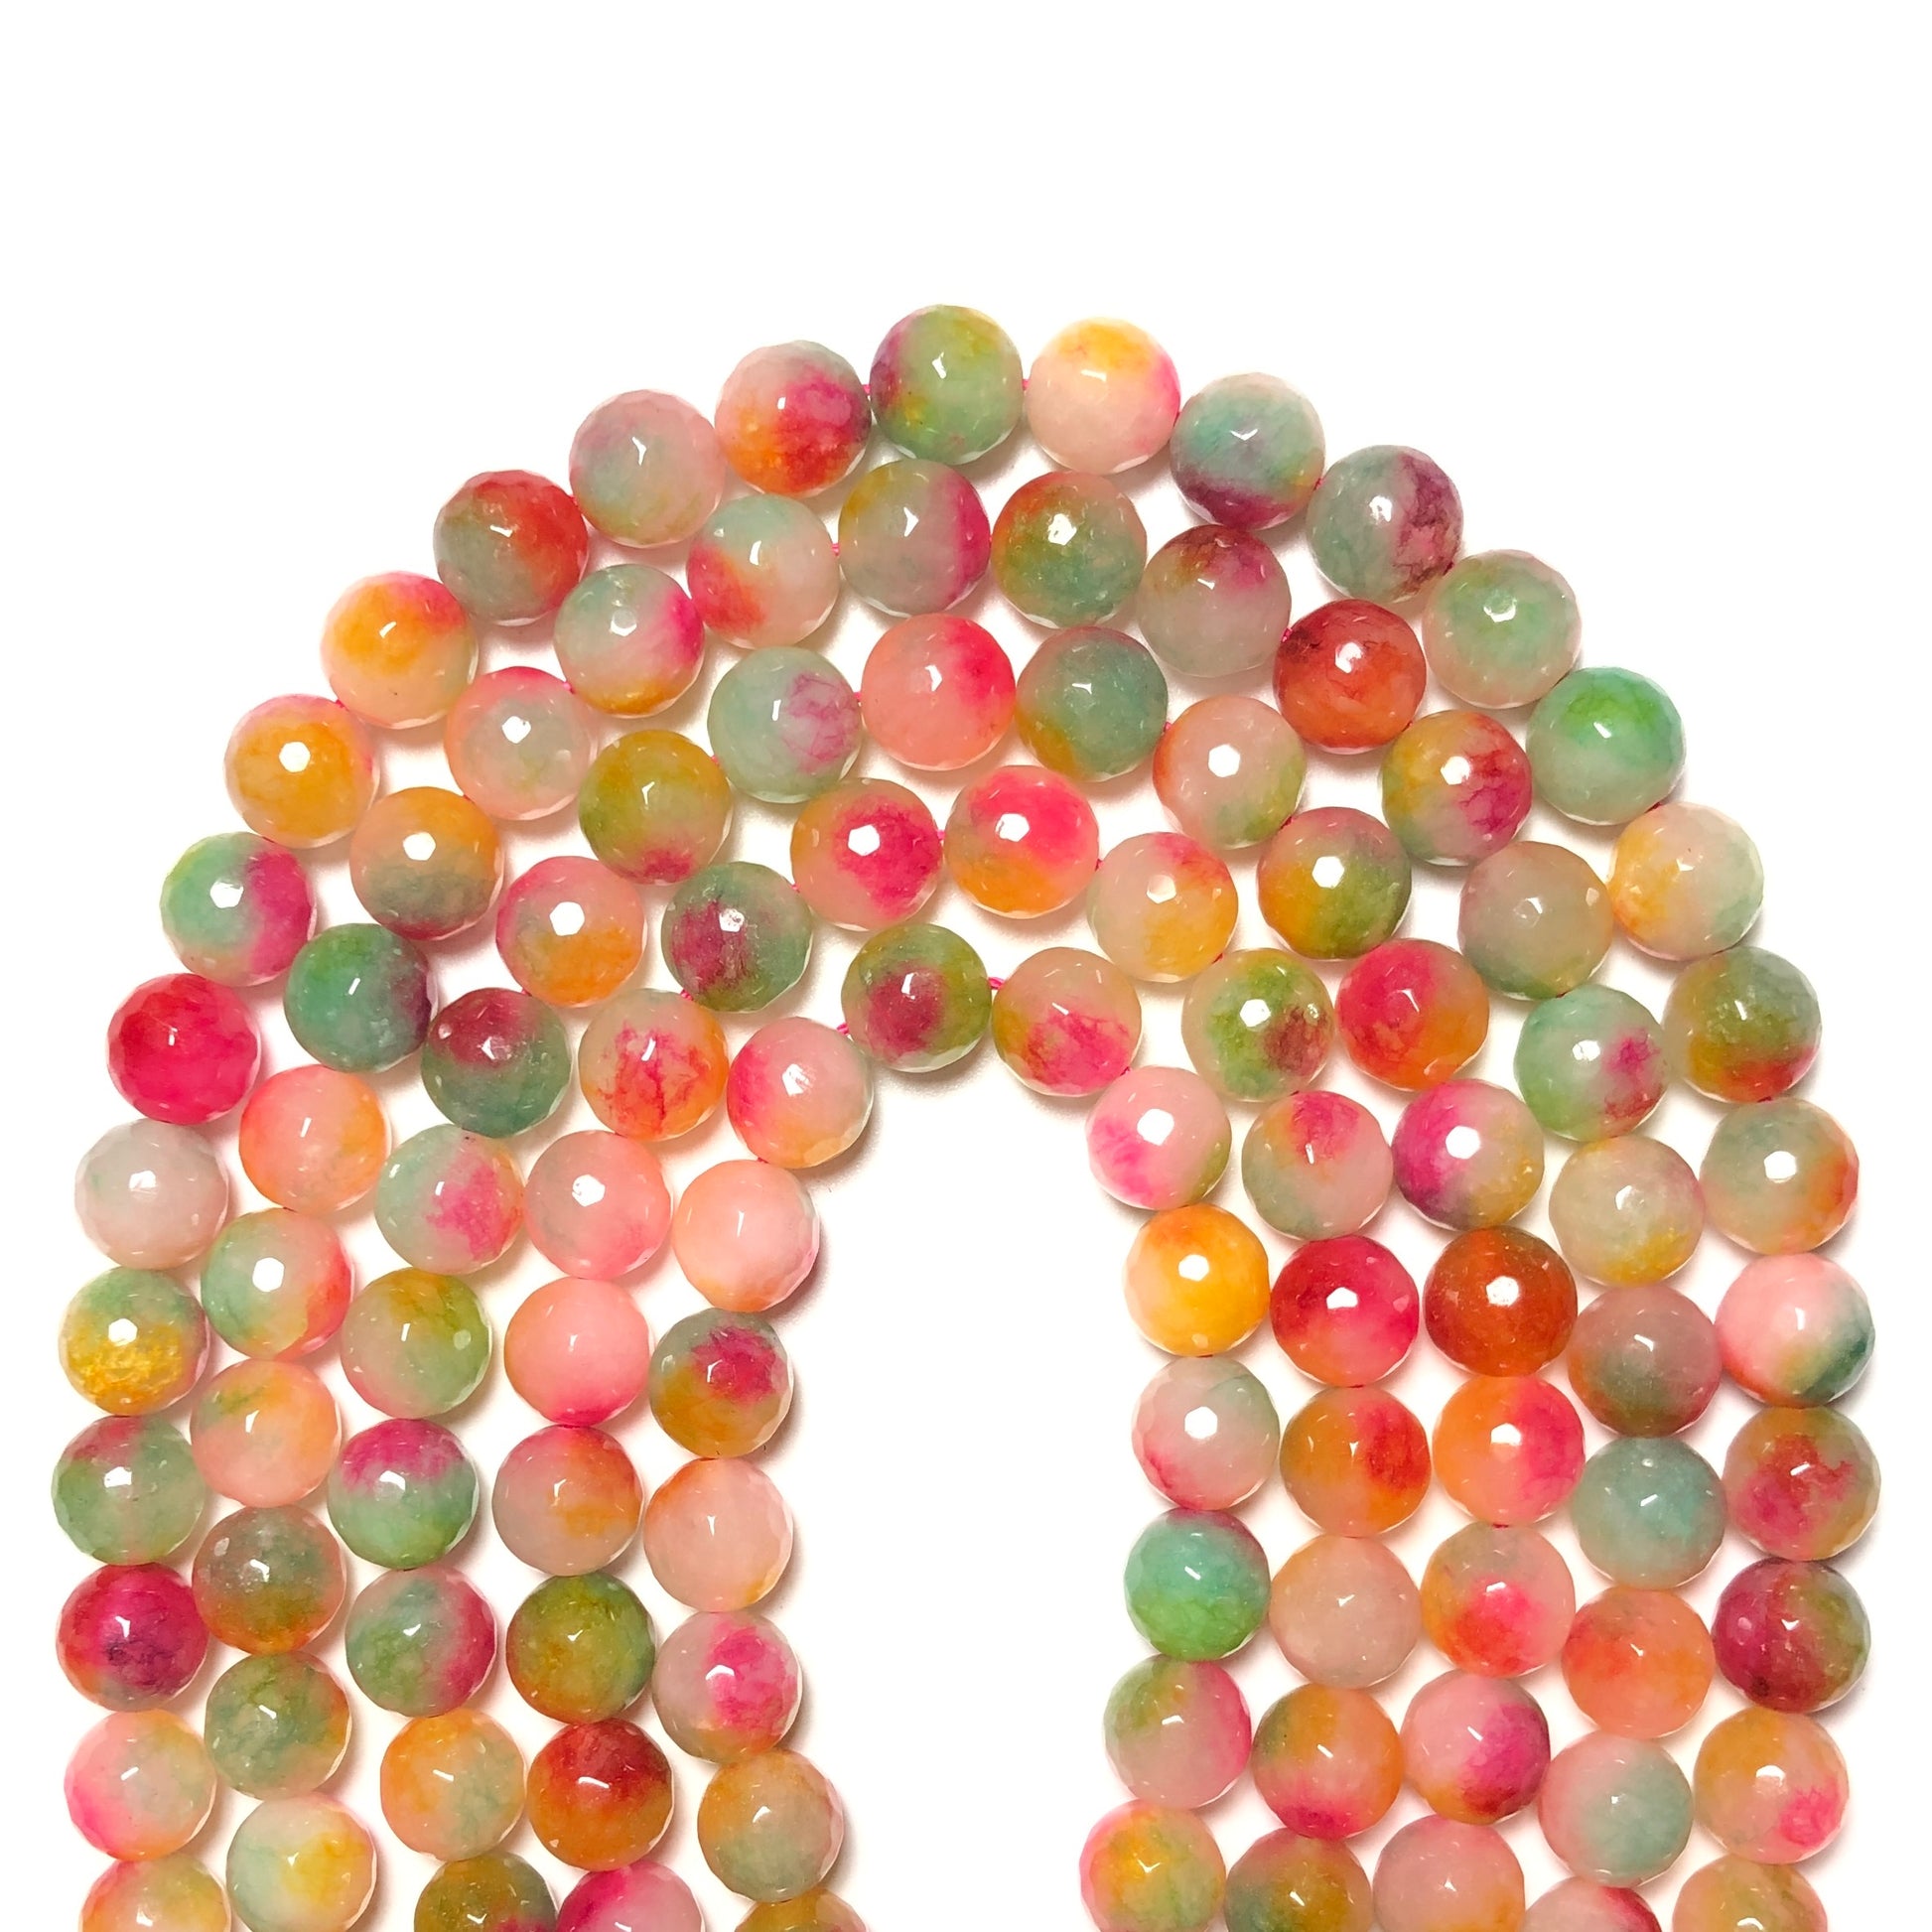 2 Strands/lot 10mm Pink Green Yellow Faceted Jade Stone Beads Stone Beads Faceted Jade Beads New Beads Arrivals Charms Beads Beyond